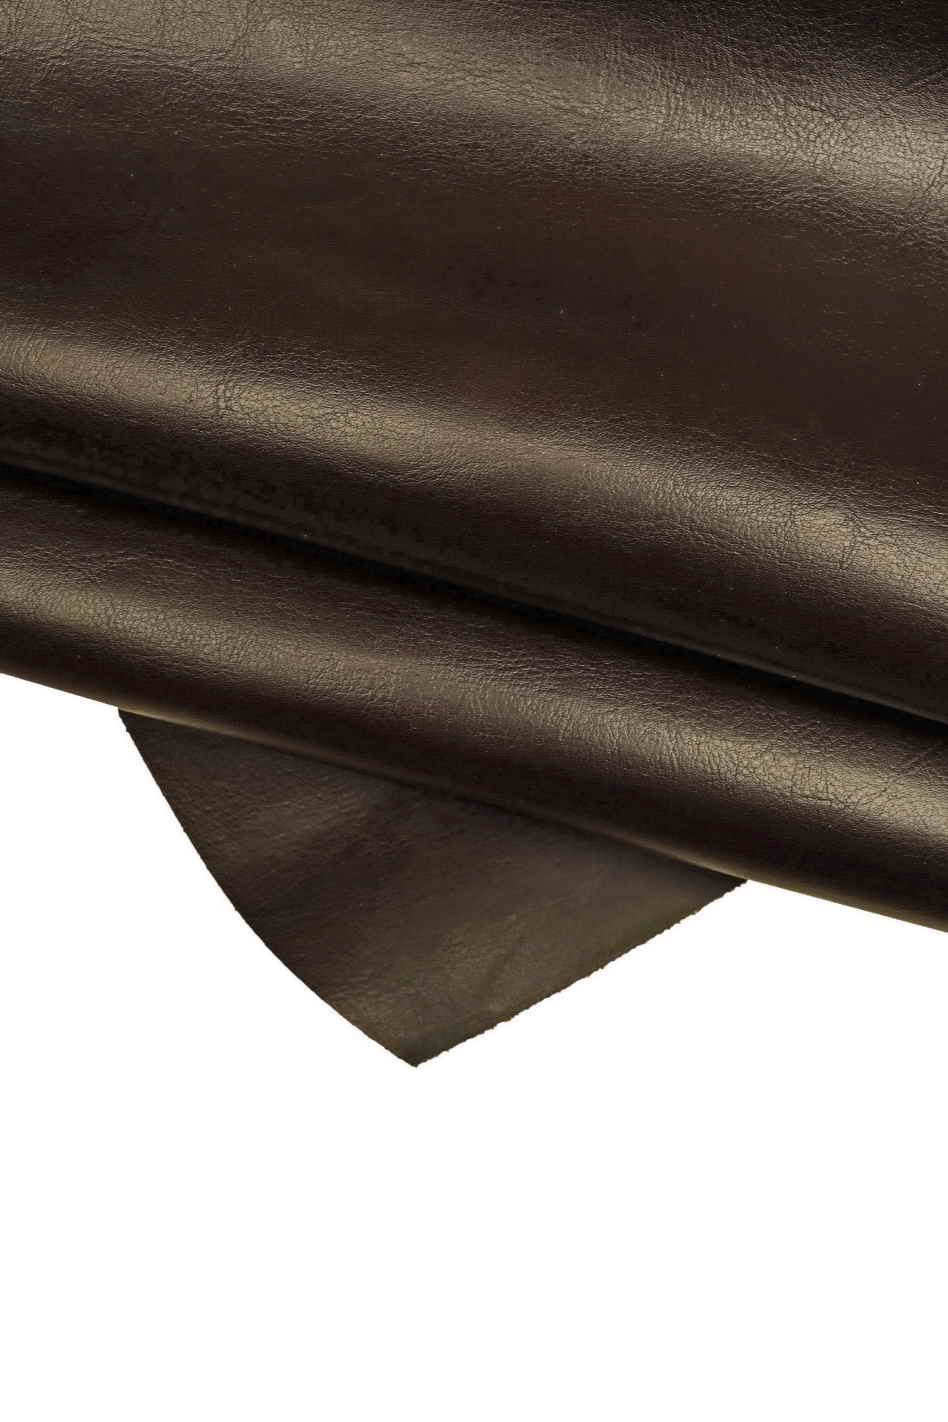 Upholstery Leather, 2/3 oz. - Chocolate